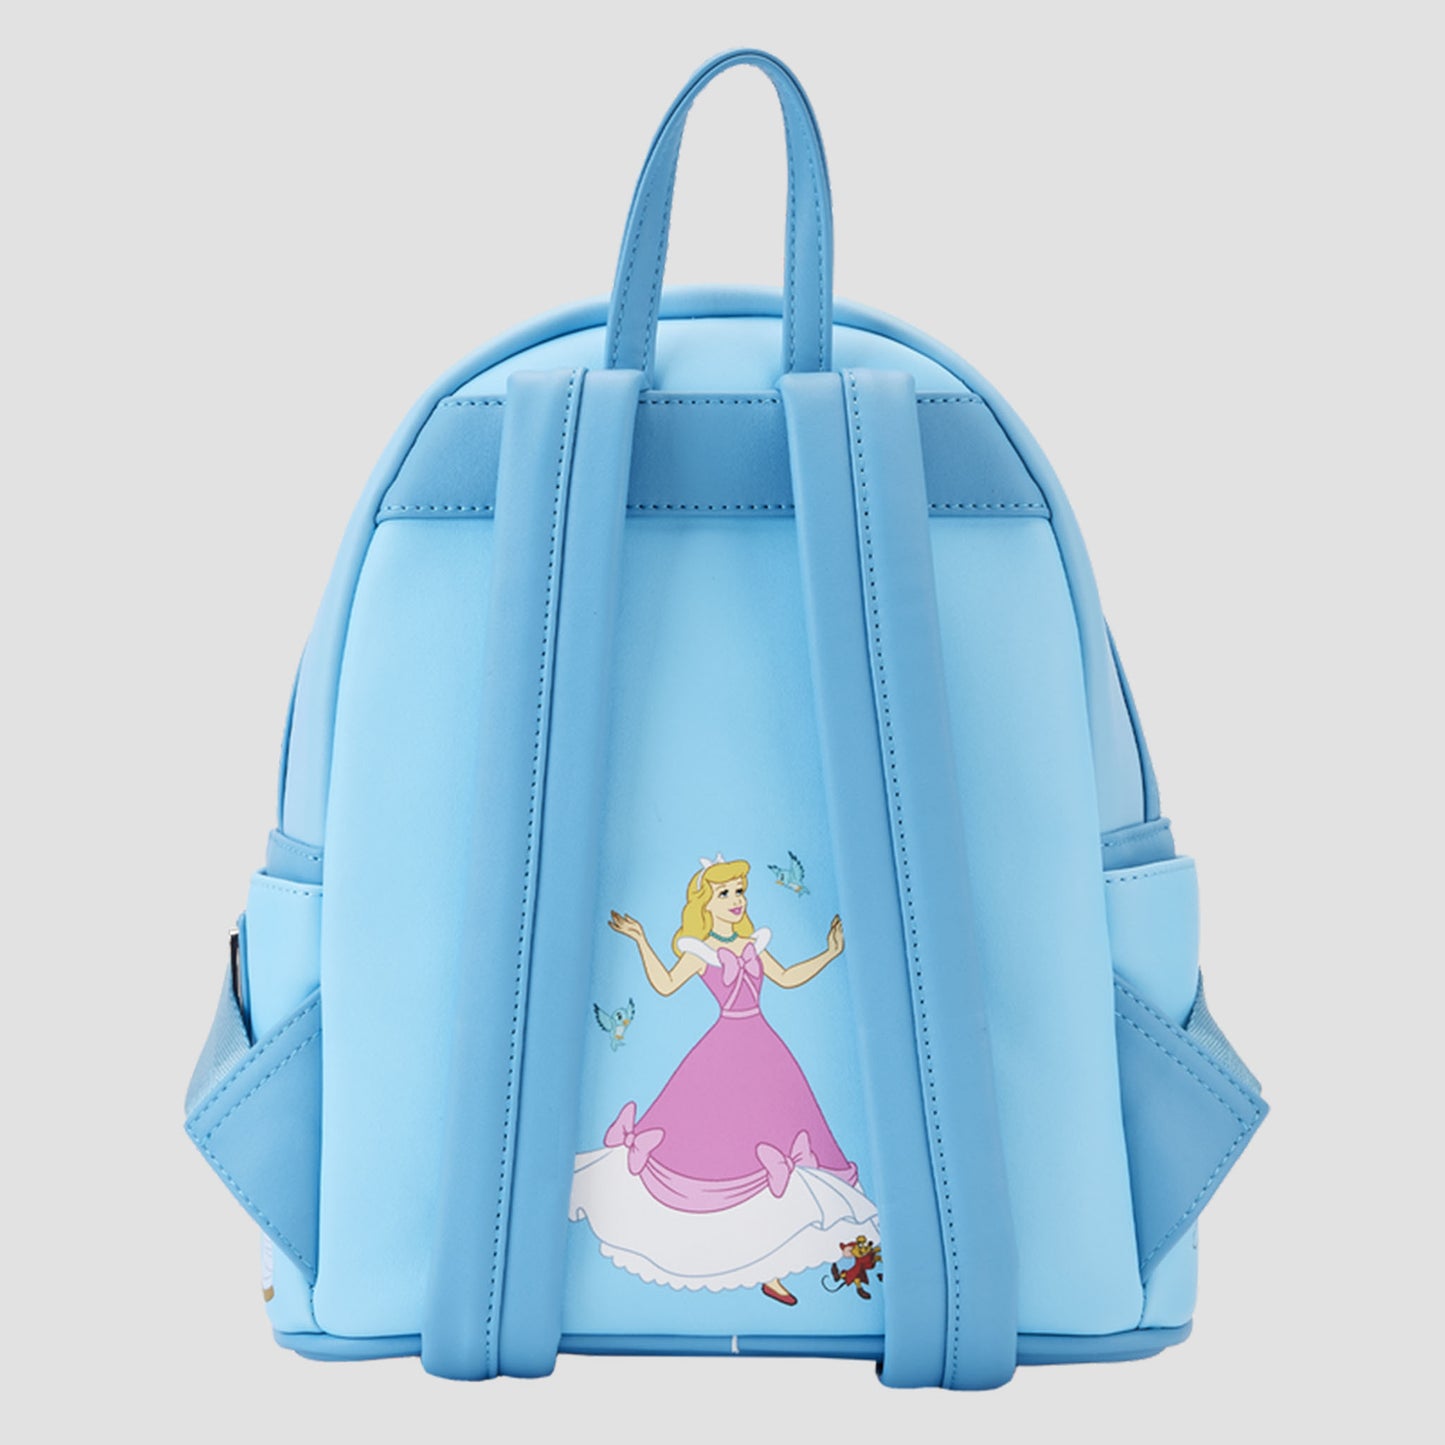 Load image into Gallery viewer, Cinderella (Disney) Lenticular Princess Series Mini Backpack by Loungefly
